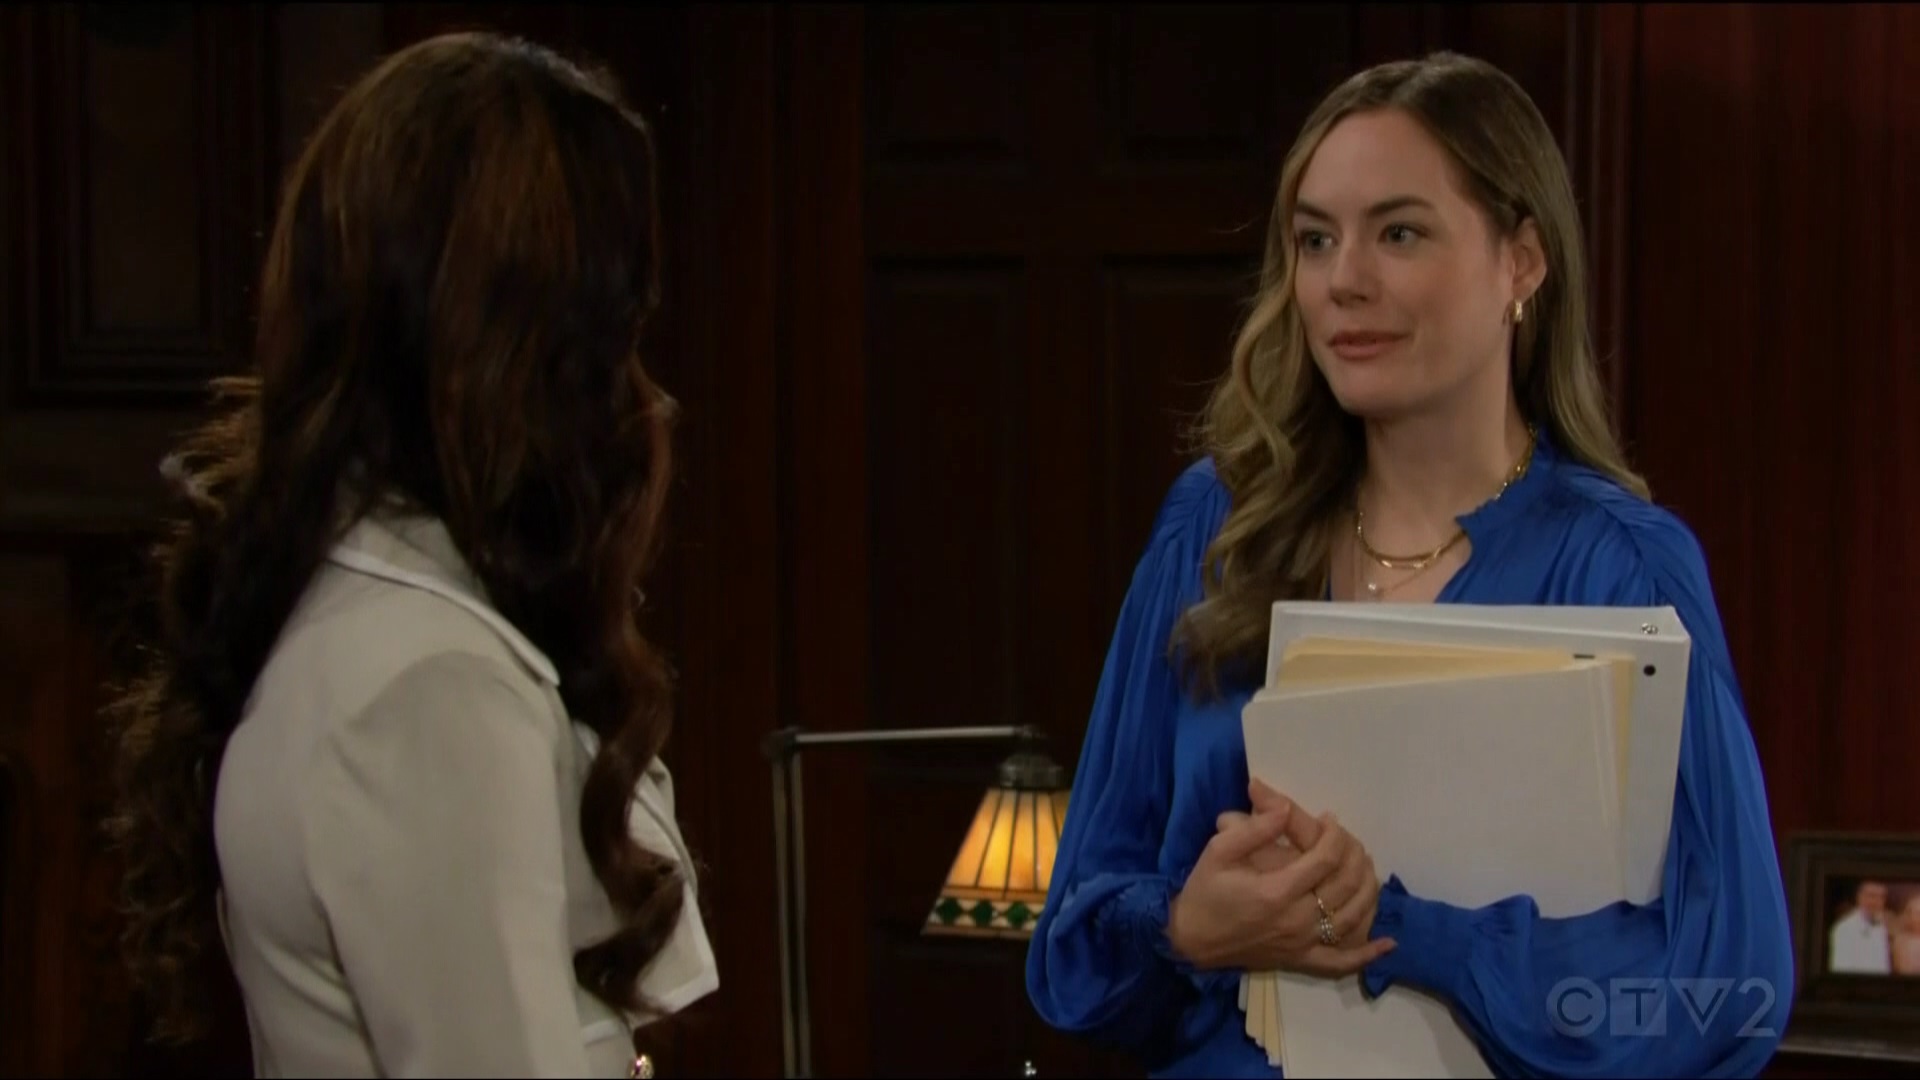 hope tells steffy all is well